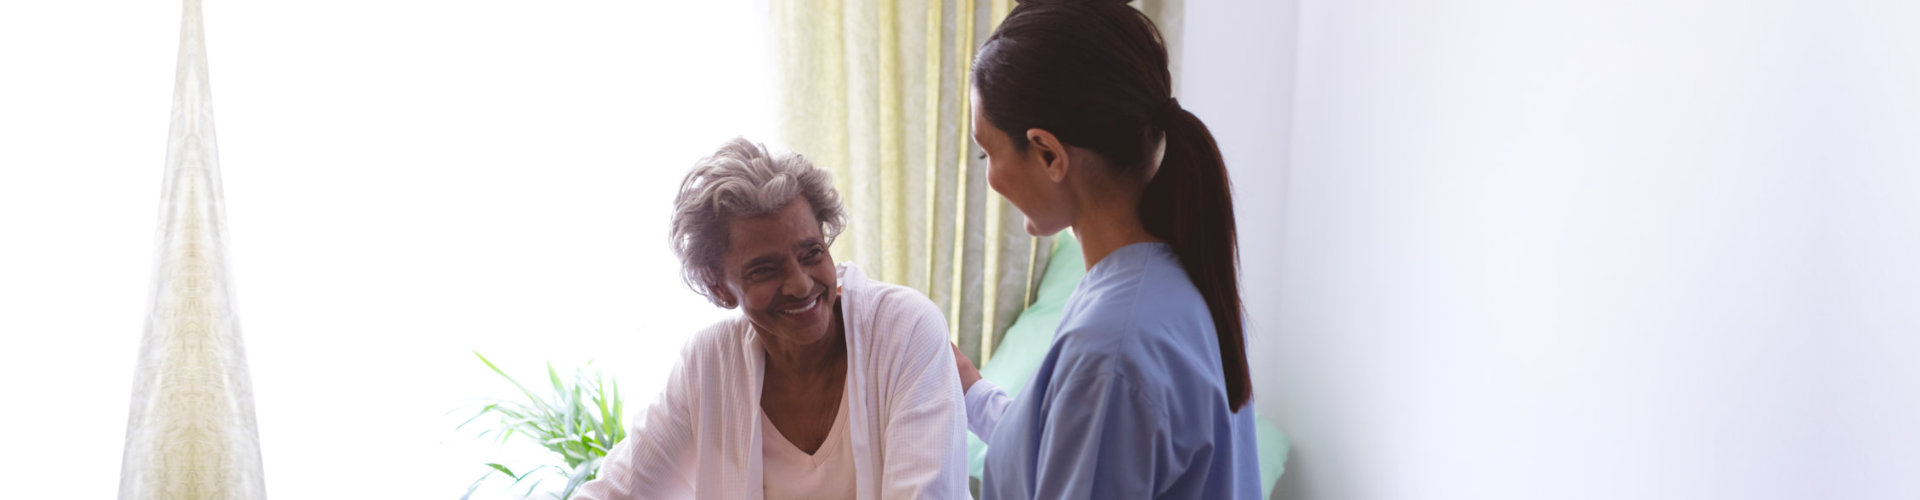 old woman smiling while the caregiver supporting her